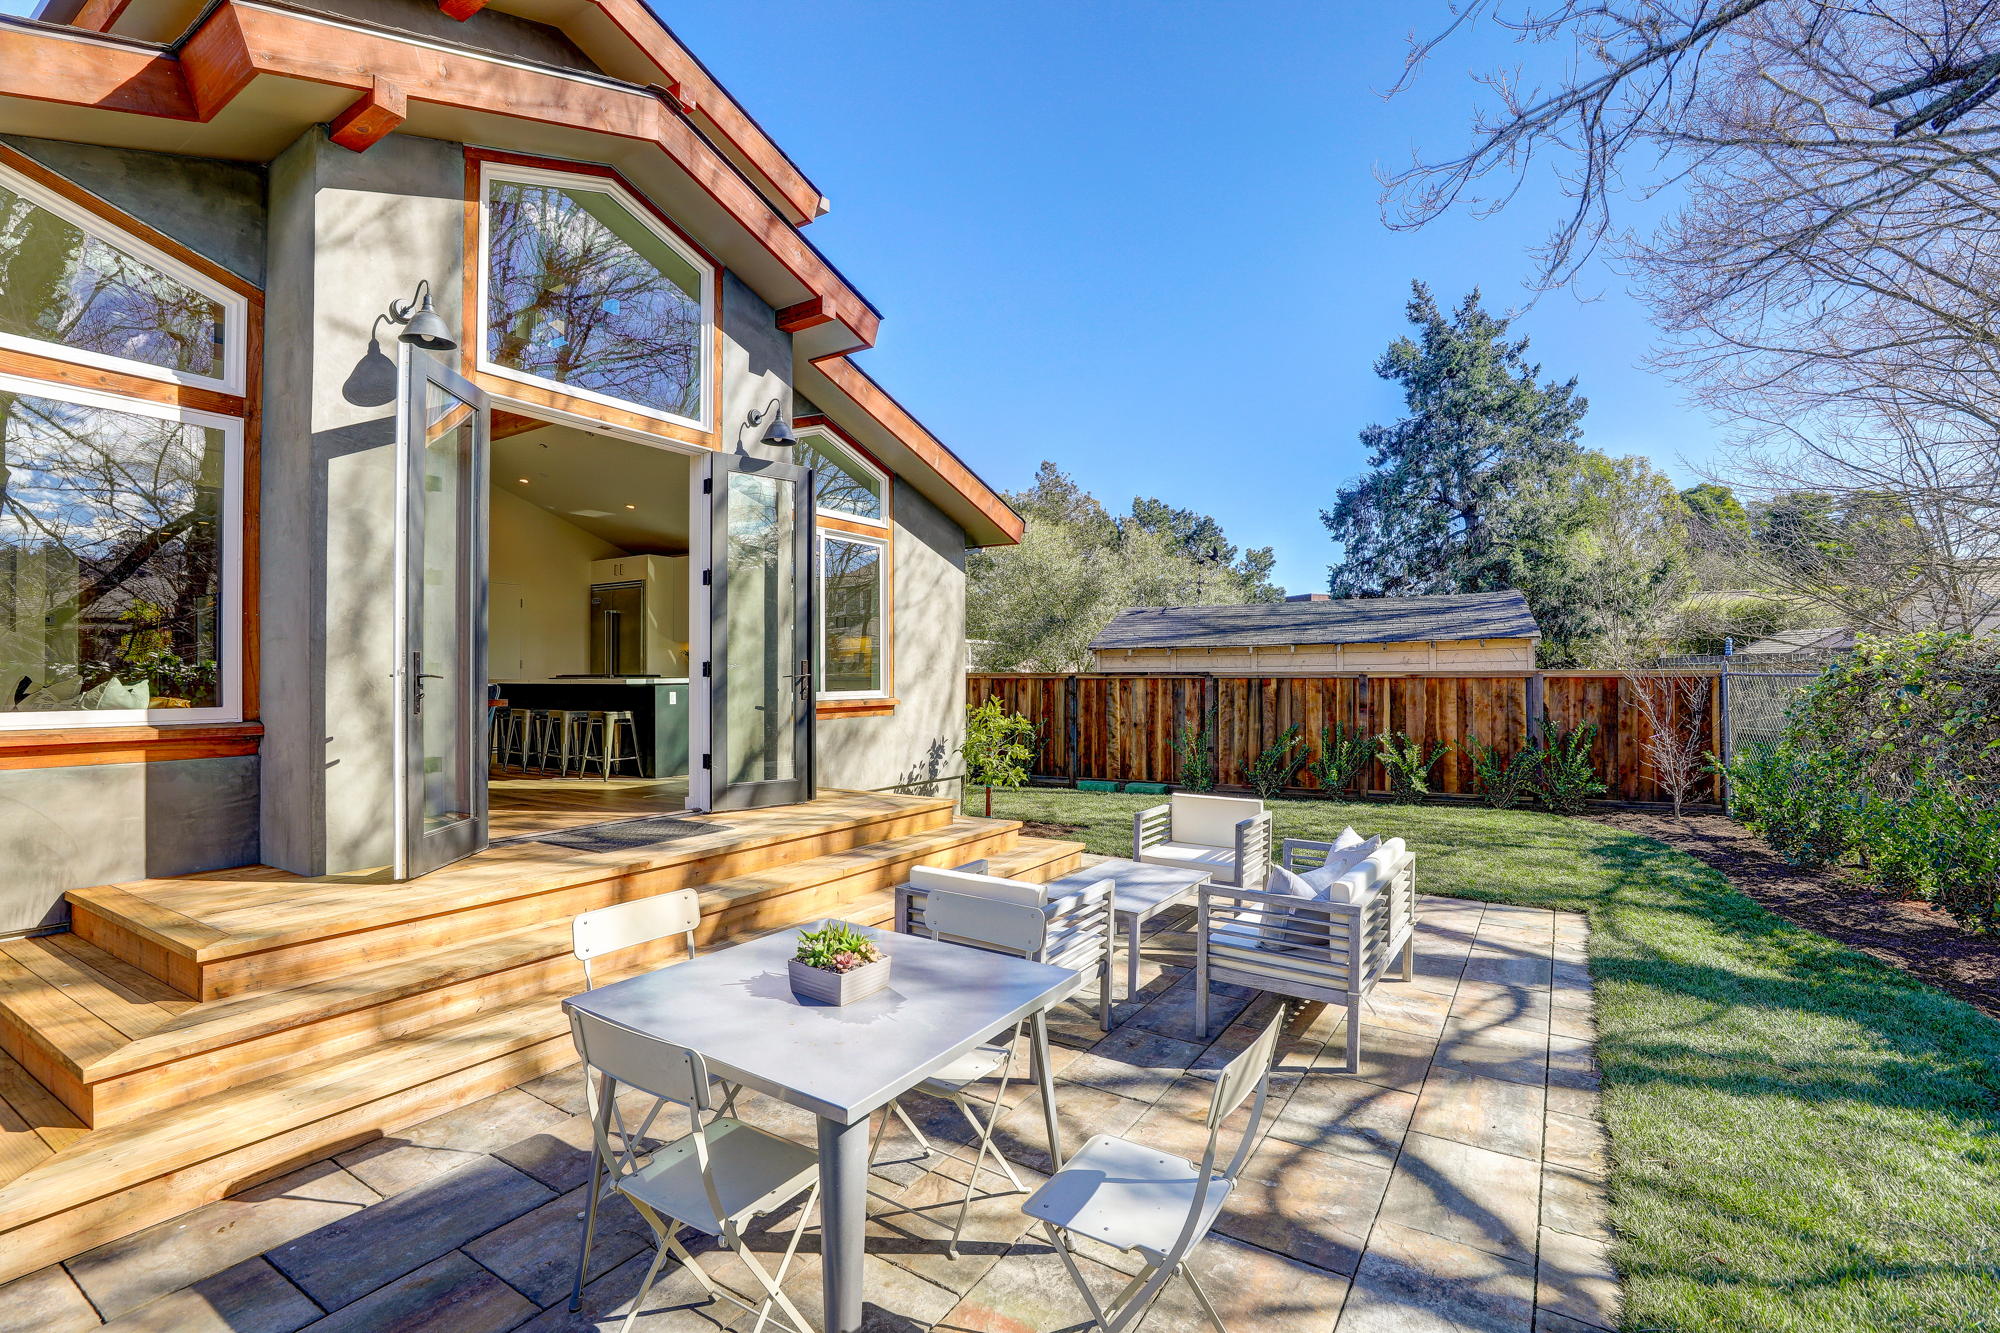 38 Ryan Avenue, Mill Valley - Sycamore Park Homes for sale - 54- Listed by Team Own Marin with Compass Real Estate.jpg